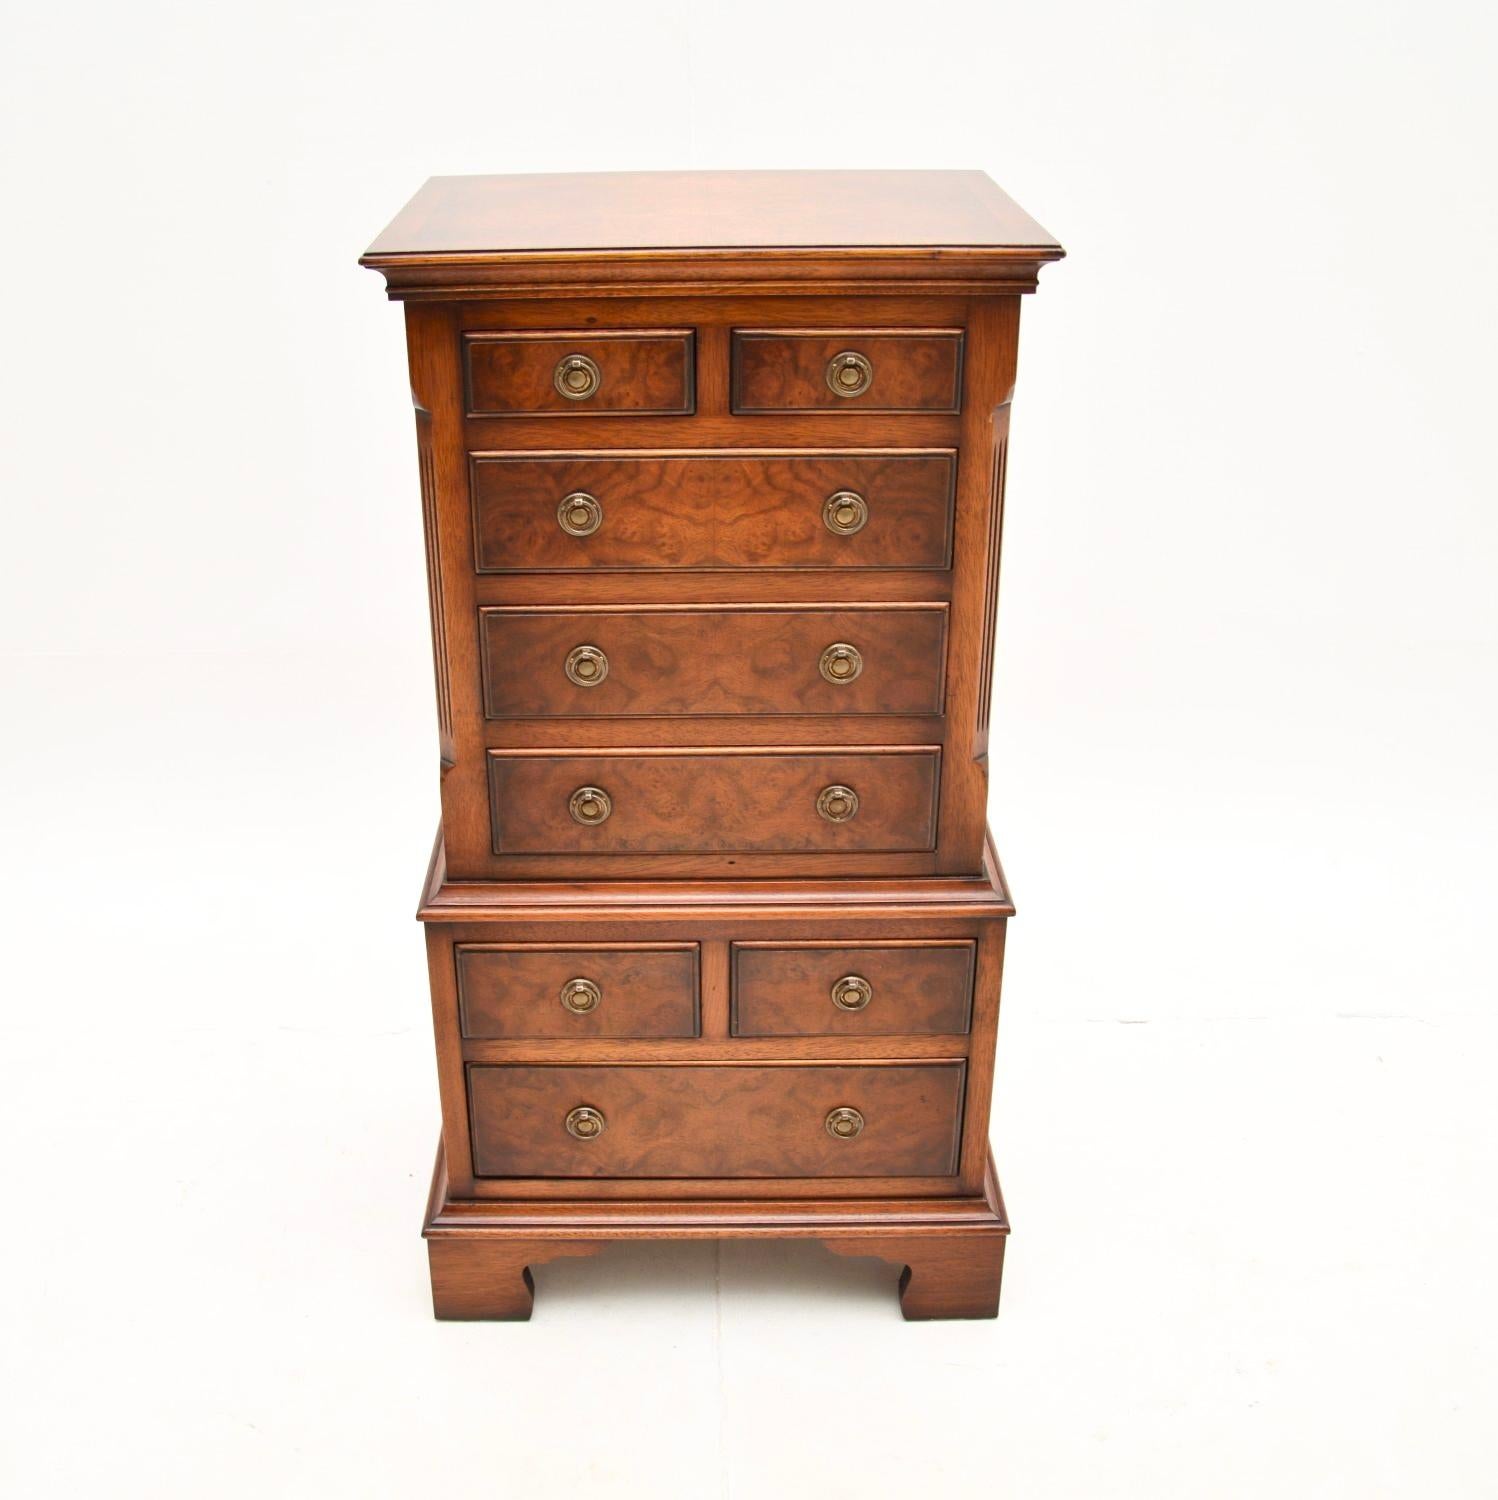 A smart and useful small antique burr walnut chest of drawers. It is in the Georgian style, this was made in England and dates from around the 1950’s.

It is of superb quality, this is full of many small drawers and this model is often known as a